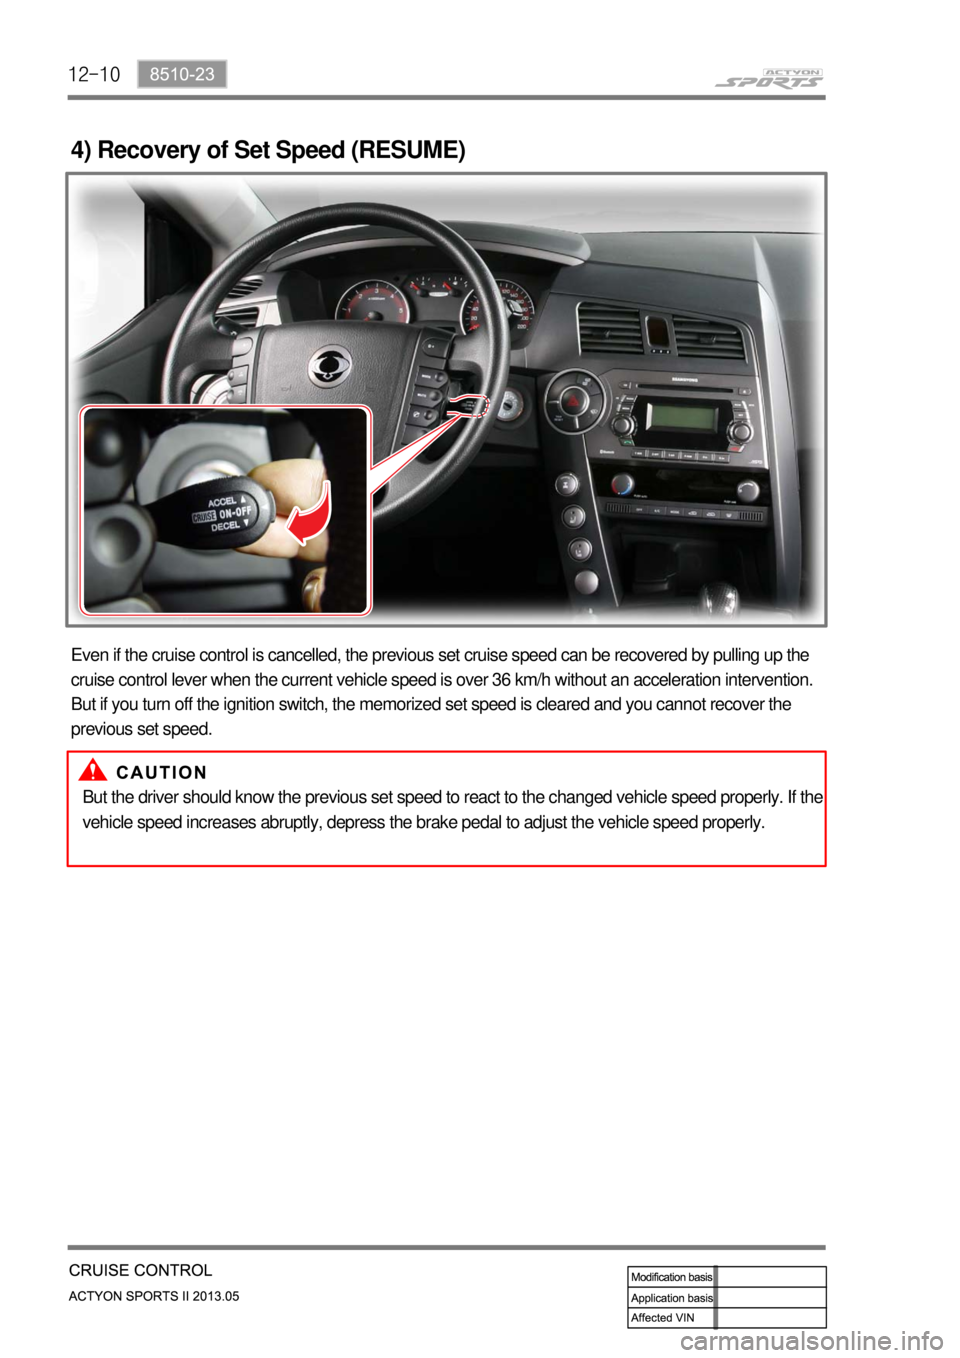 SSANGYONG NEW ACTYON SPORTS 2013  Service Manual 12-10
4) Recovery of Set Speed (RESUME)
Even if the cruise control is cancelled, the previous set cruise speed can be recovered by pulling up the 
cruise control lever when the current vehicle speed i